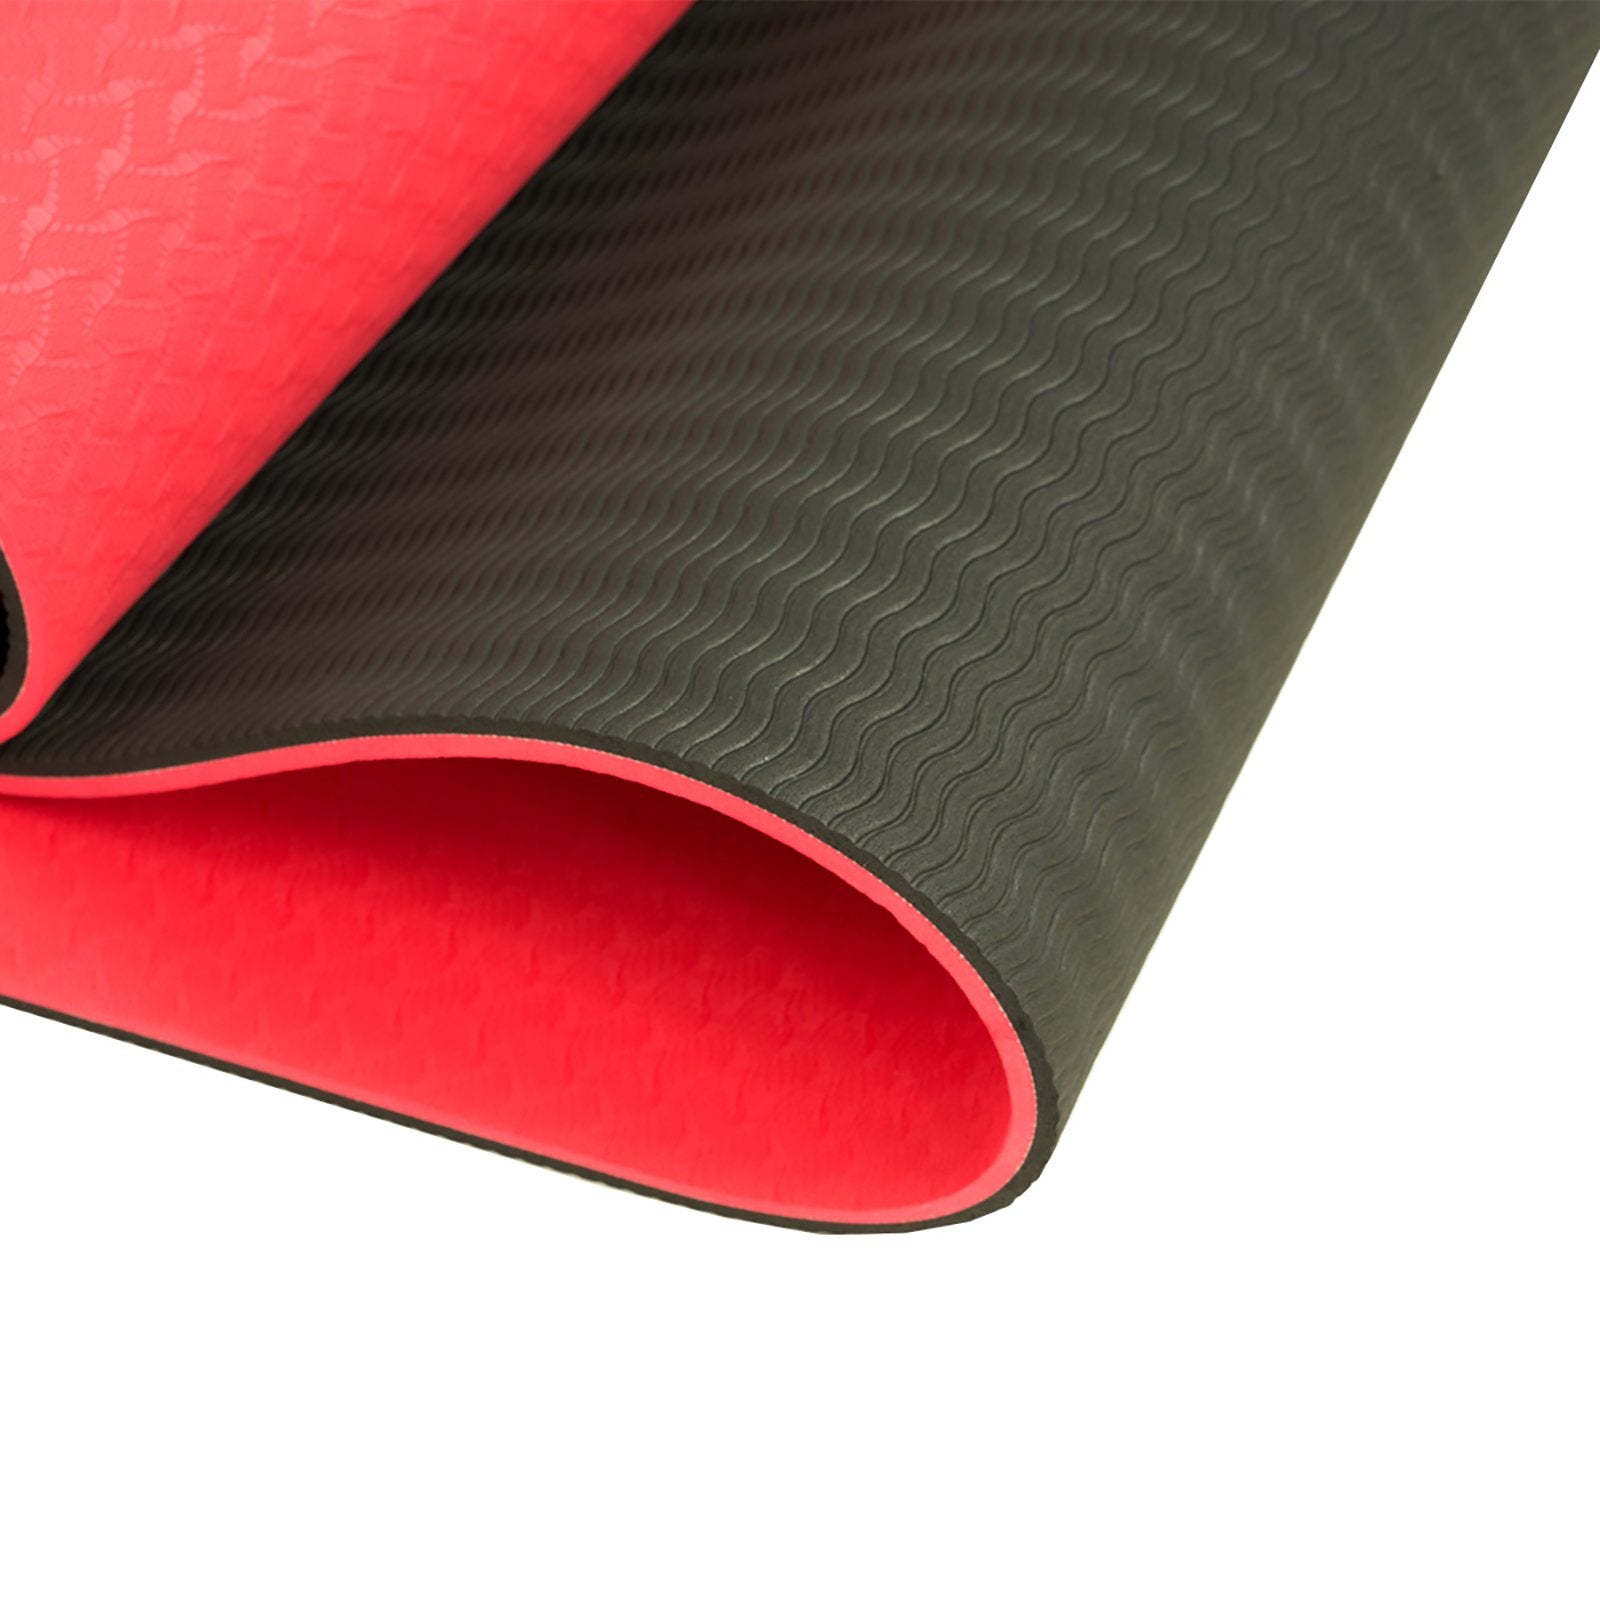 Eco-Friendly Dual Layer 8mm Yoga Mat | Red Blush | Non-Slip Surface and Carry Strap for Ultimate Comfort and Portability